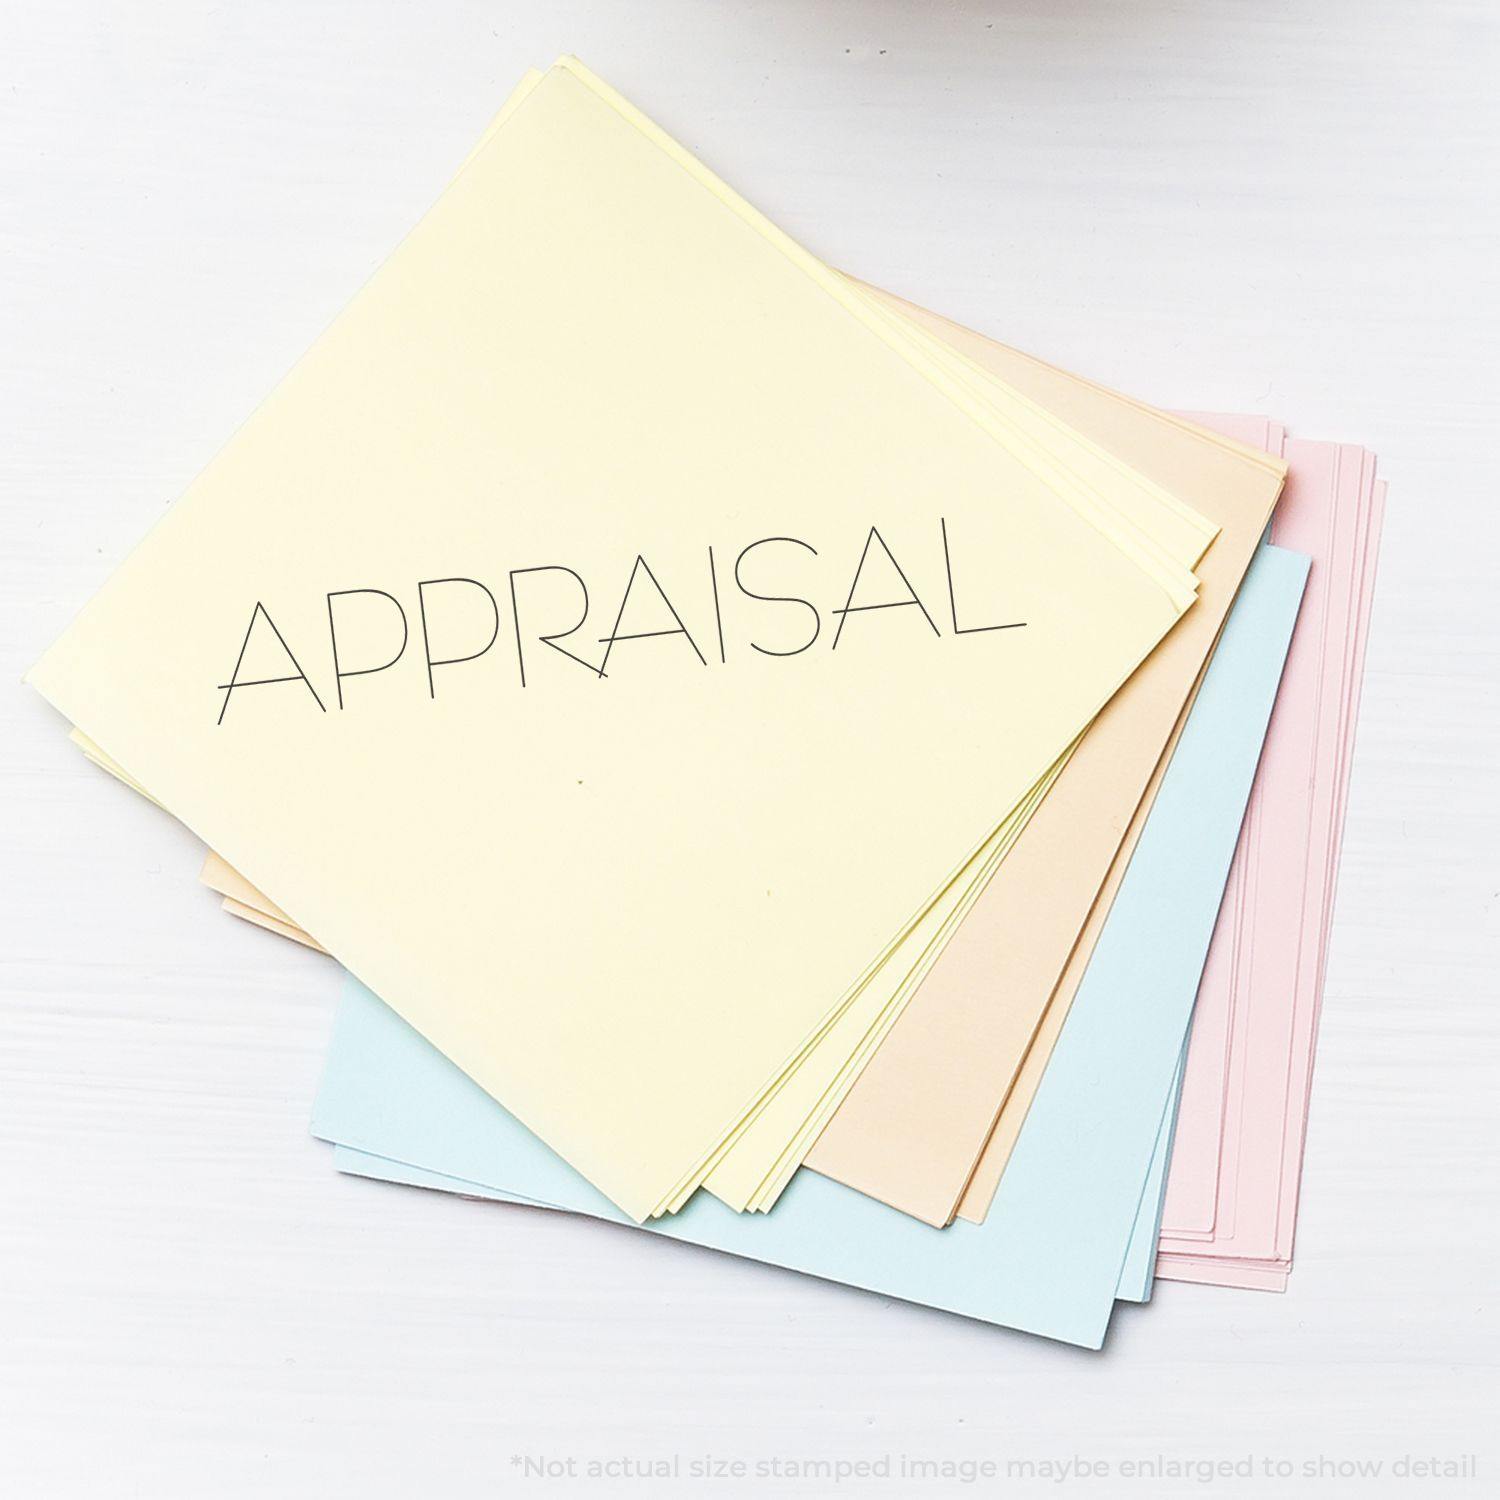 A stock office rubber stamp with a stamped image showing how the text "APPRAISAL" is displayed after stamping.